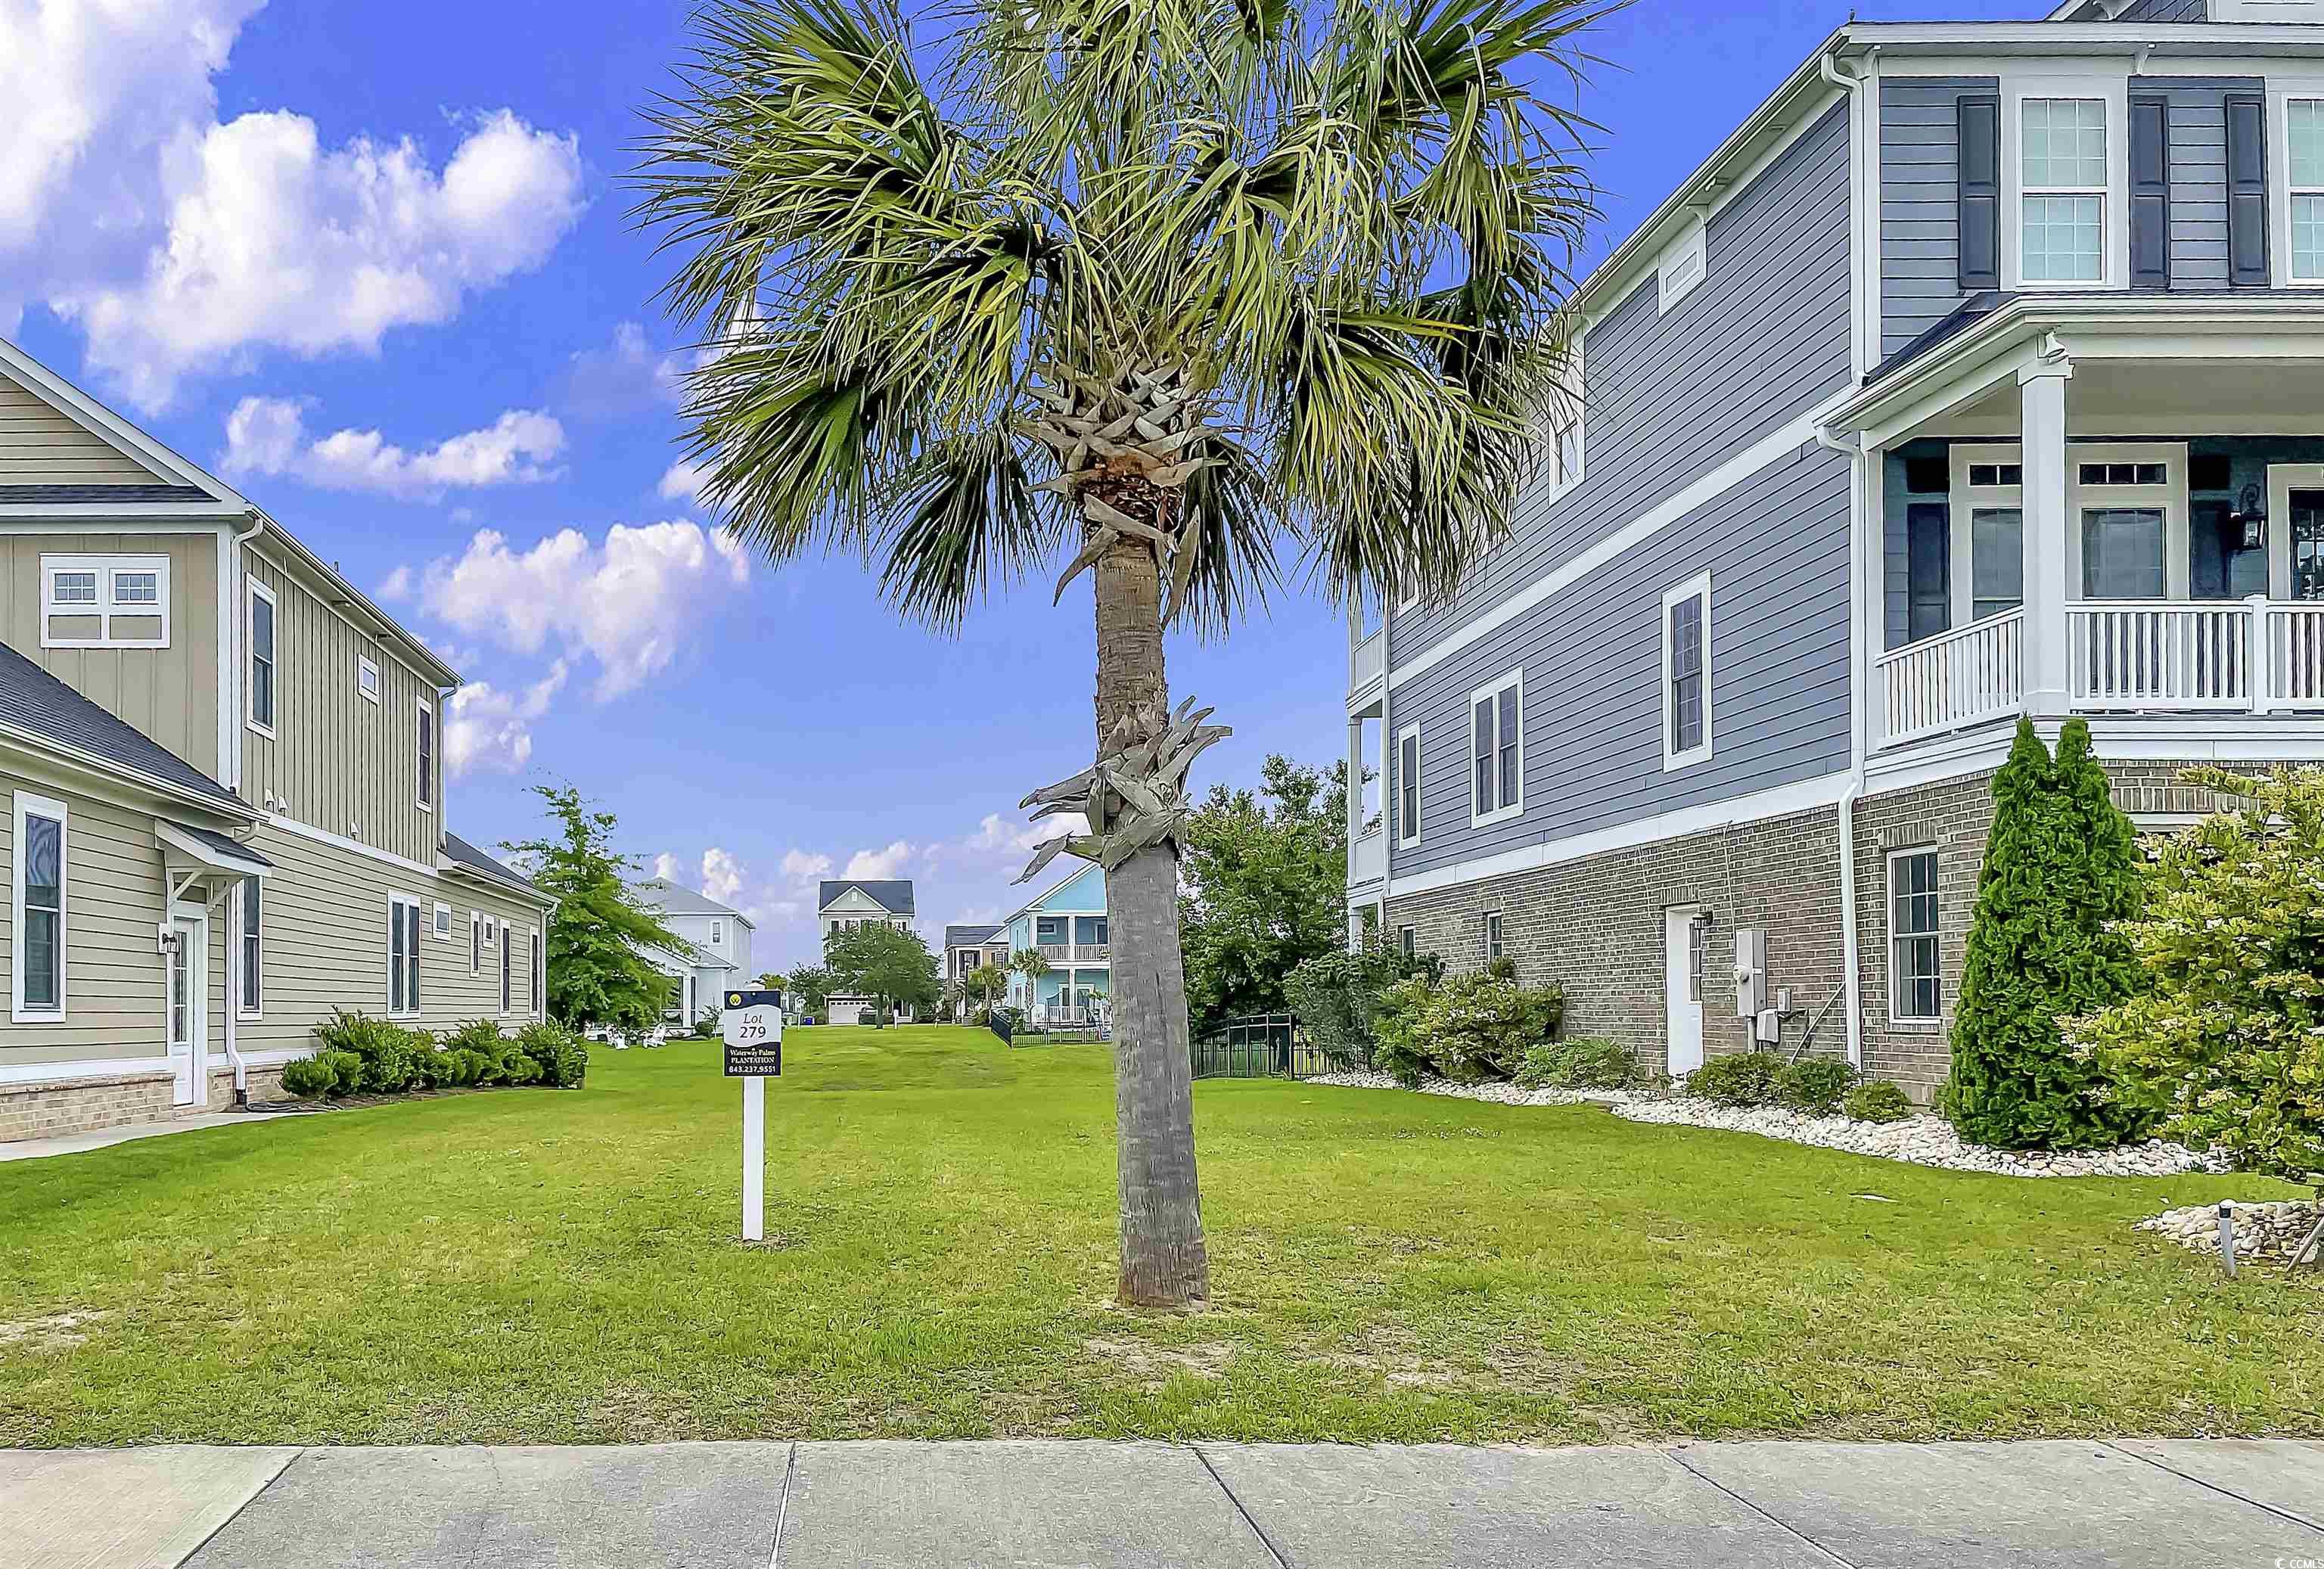 1112 Whispering Winds Dr. Myrtle Beach, SC 29579